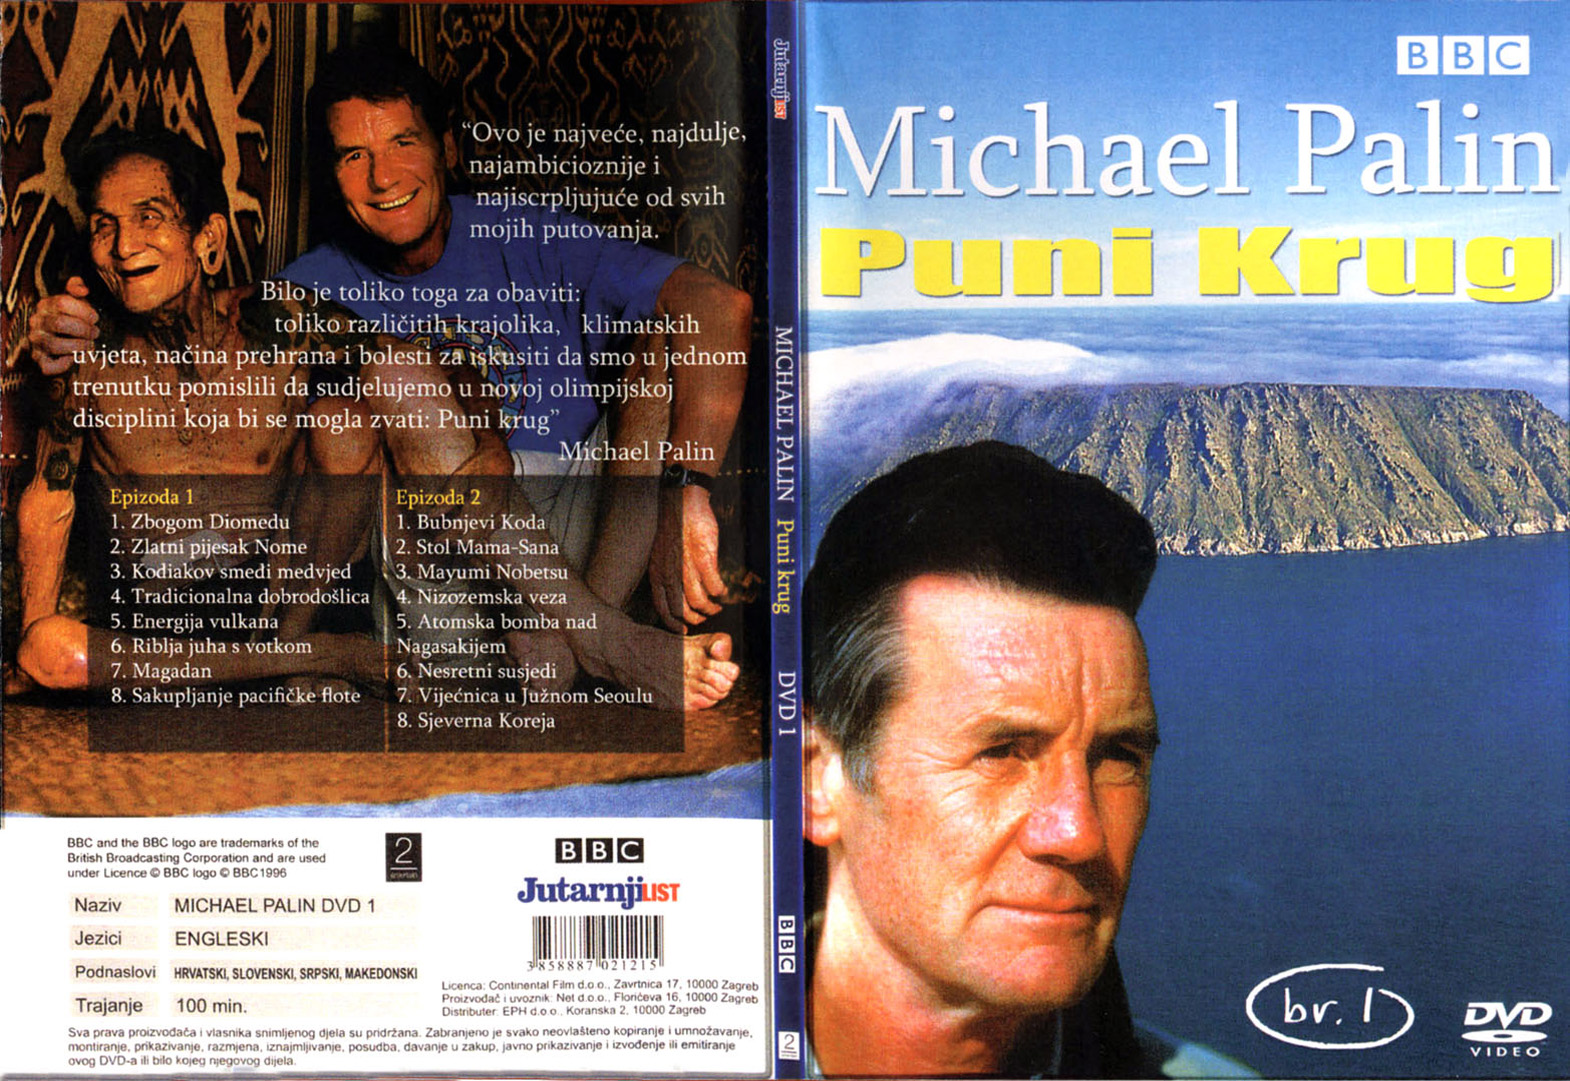 Click to view full size image -  DVD Cover - M - mpalin_puni_krug_I_dvd - mpalin_puni_krug_I_dvd.jpg